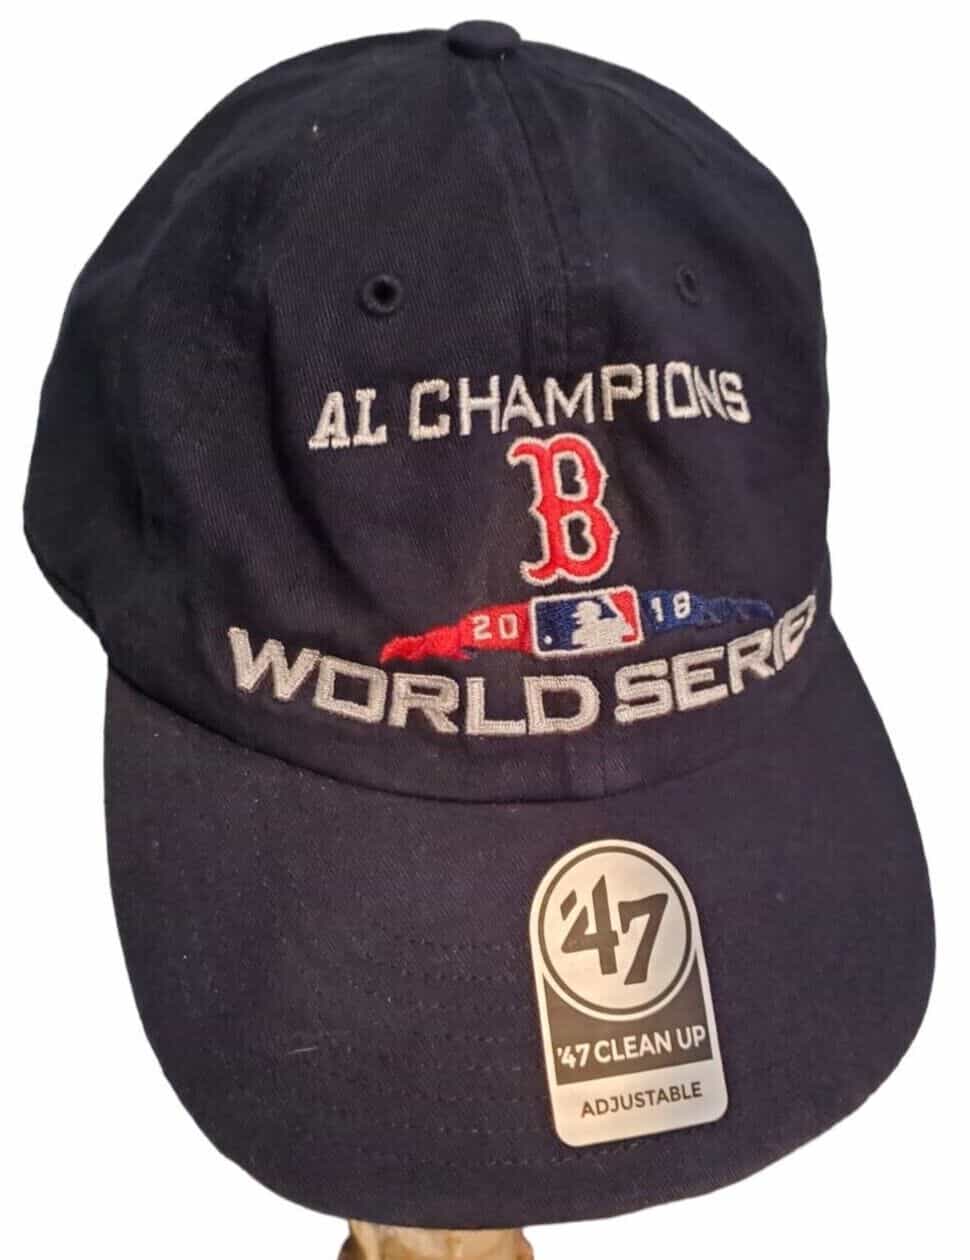 2018 Boston Red Sox World Series Baseball Cap In Good Condition